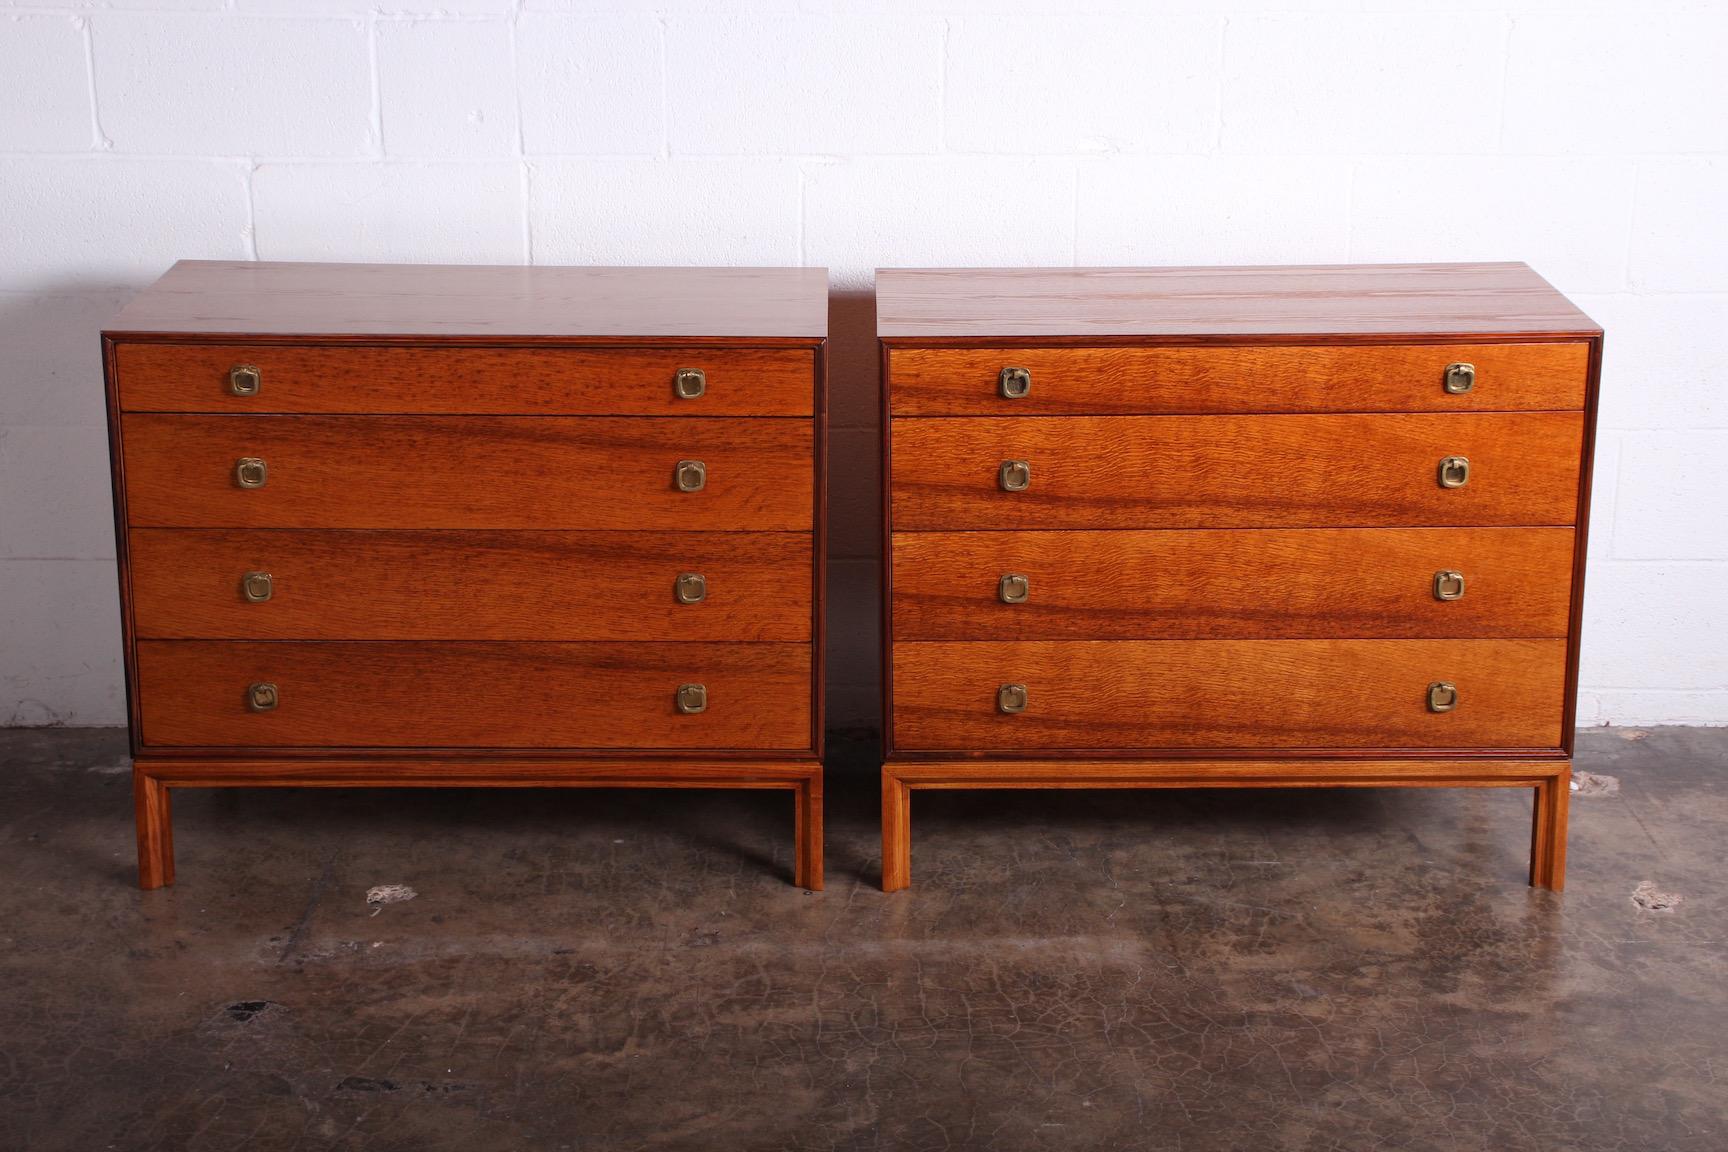 A pair of ash cabinets with oak drawers, rosewood trim and brass hardware. Designed by Edward Wormley for Dunbar.